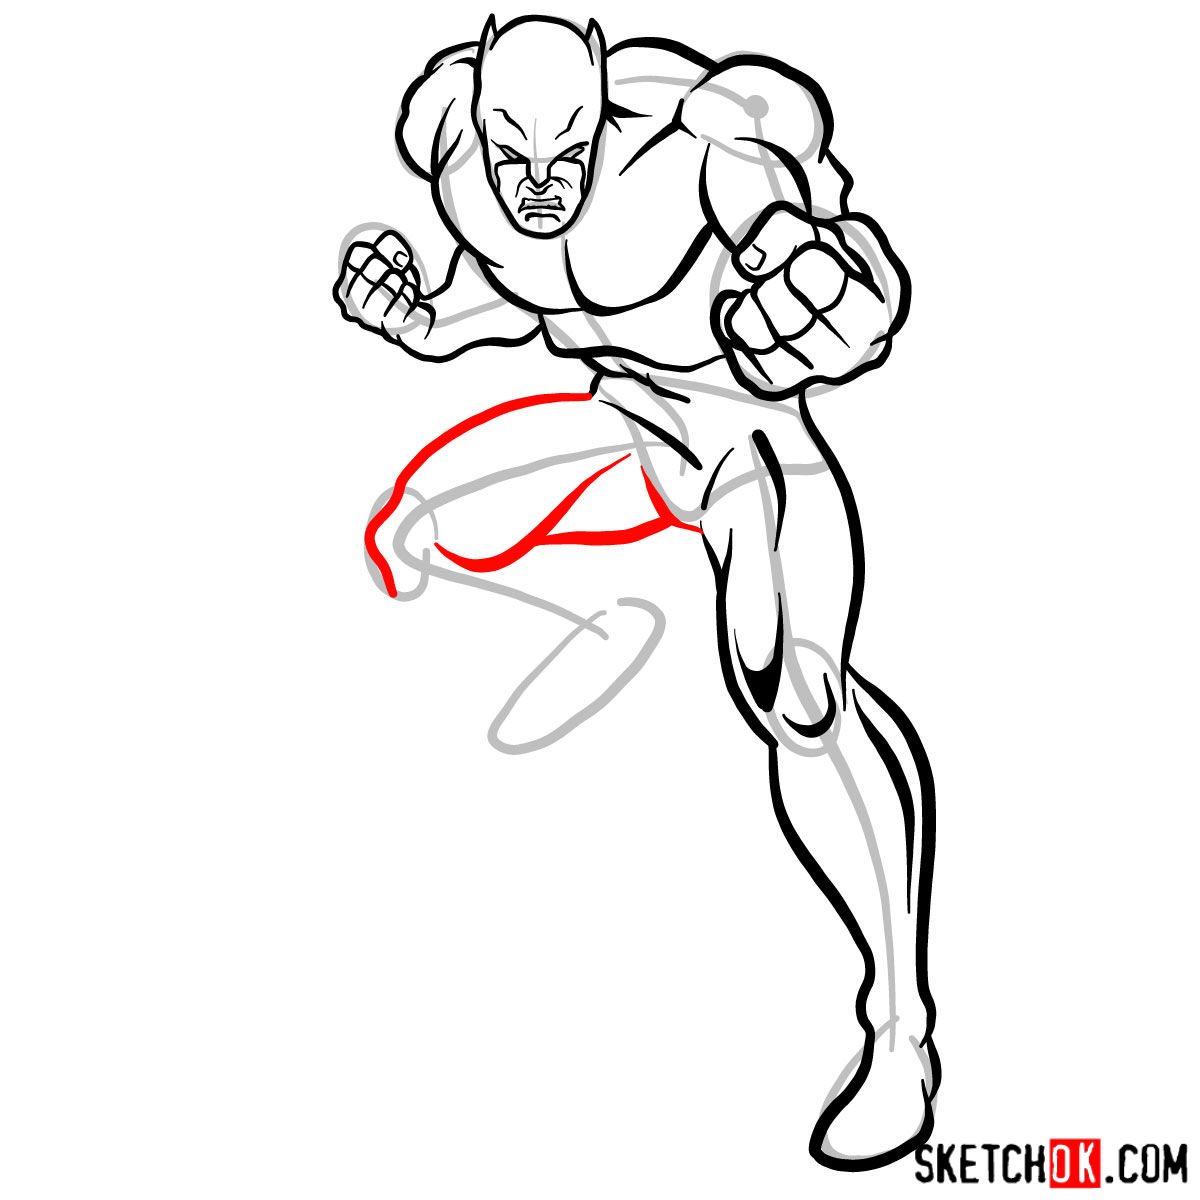 How to draw Wildcat (Ted Grant) from DC - step 11